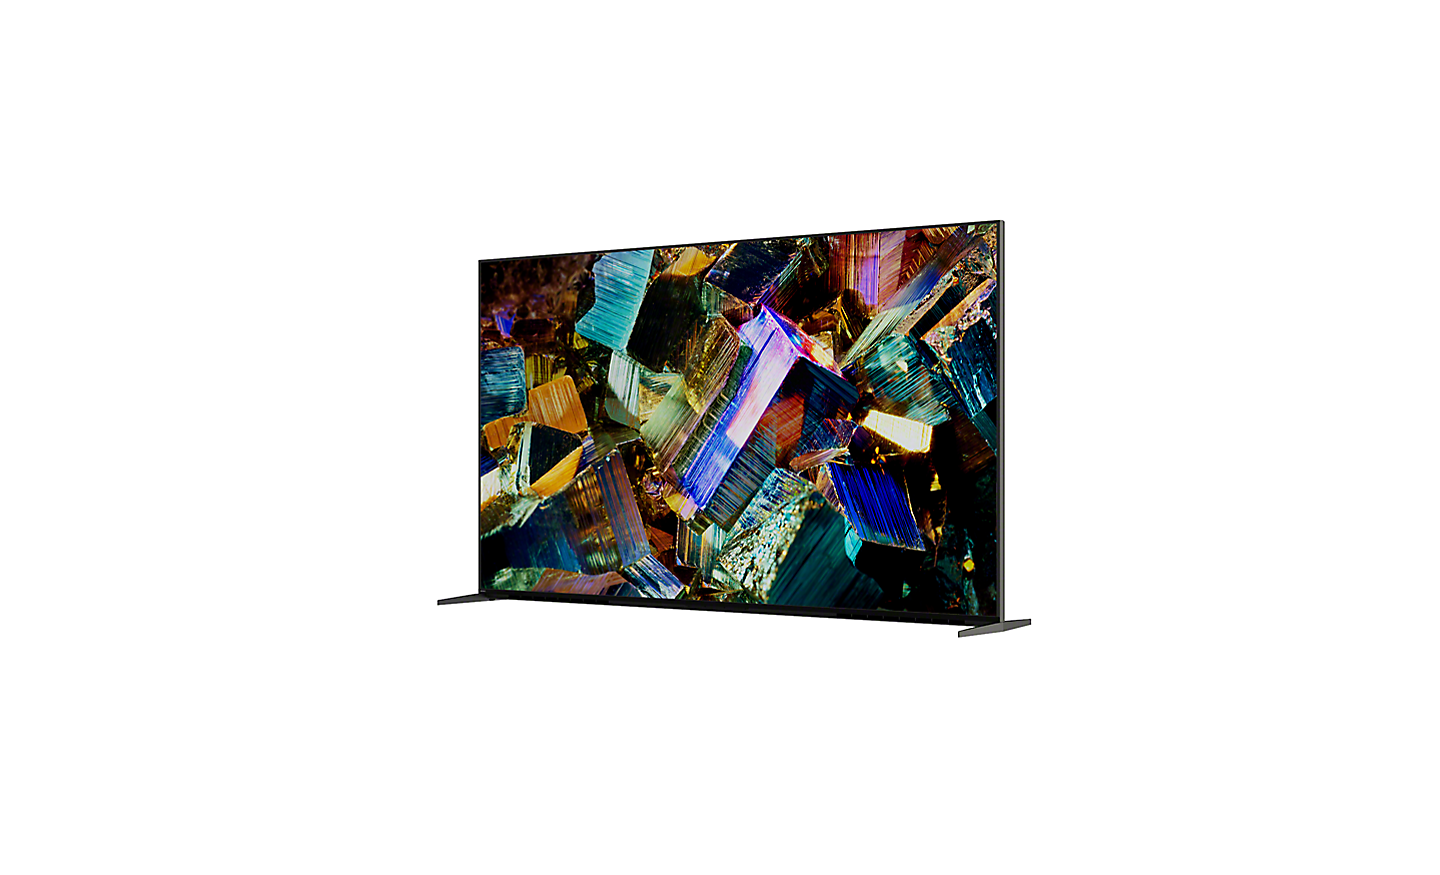 Slideable 360 viewer for Z9K Series showing 360° view of TV and screenshot of multicoloured crystals